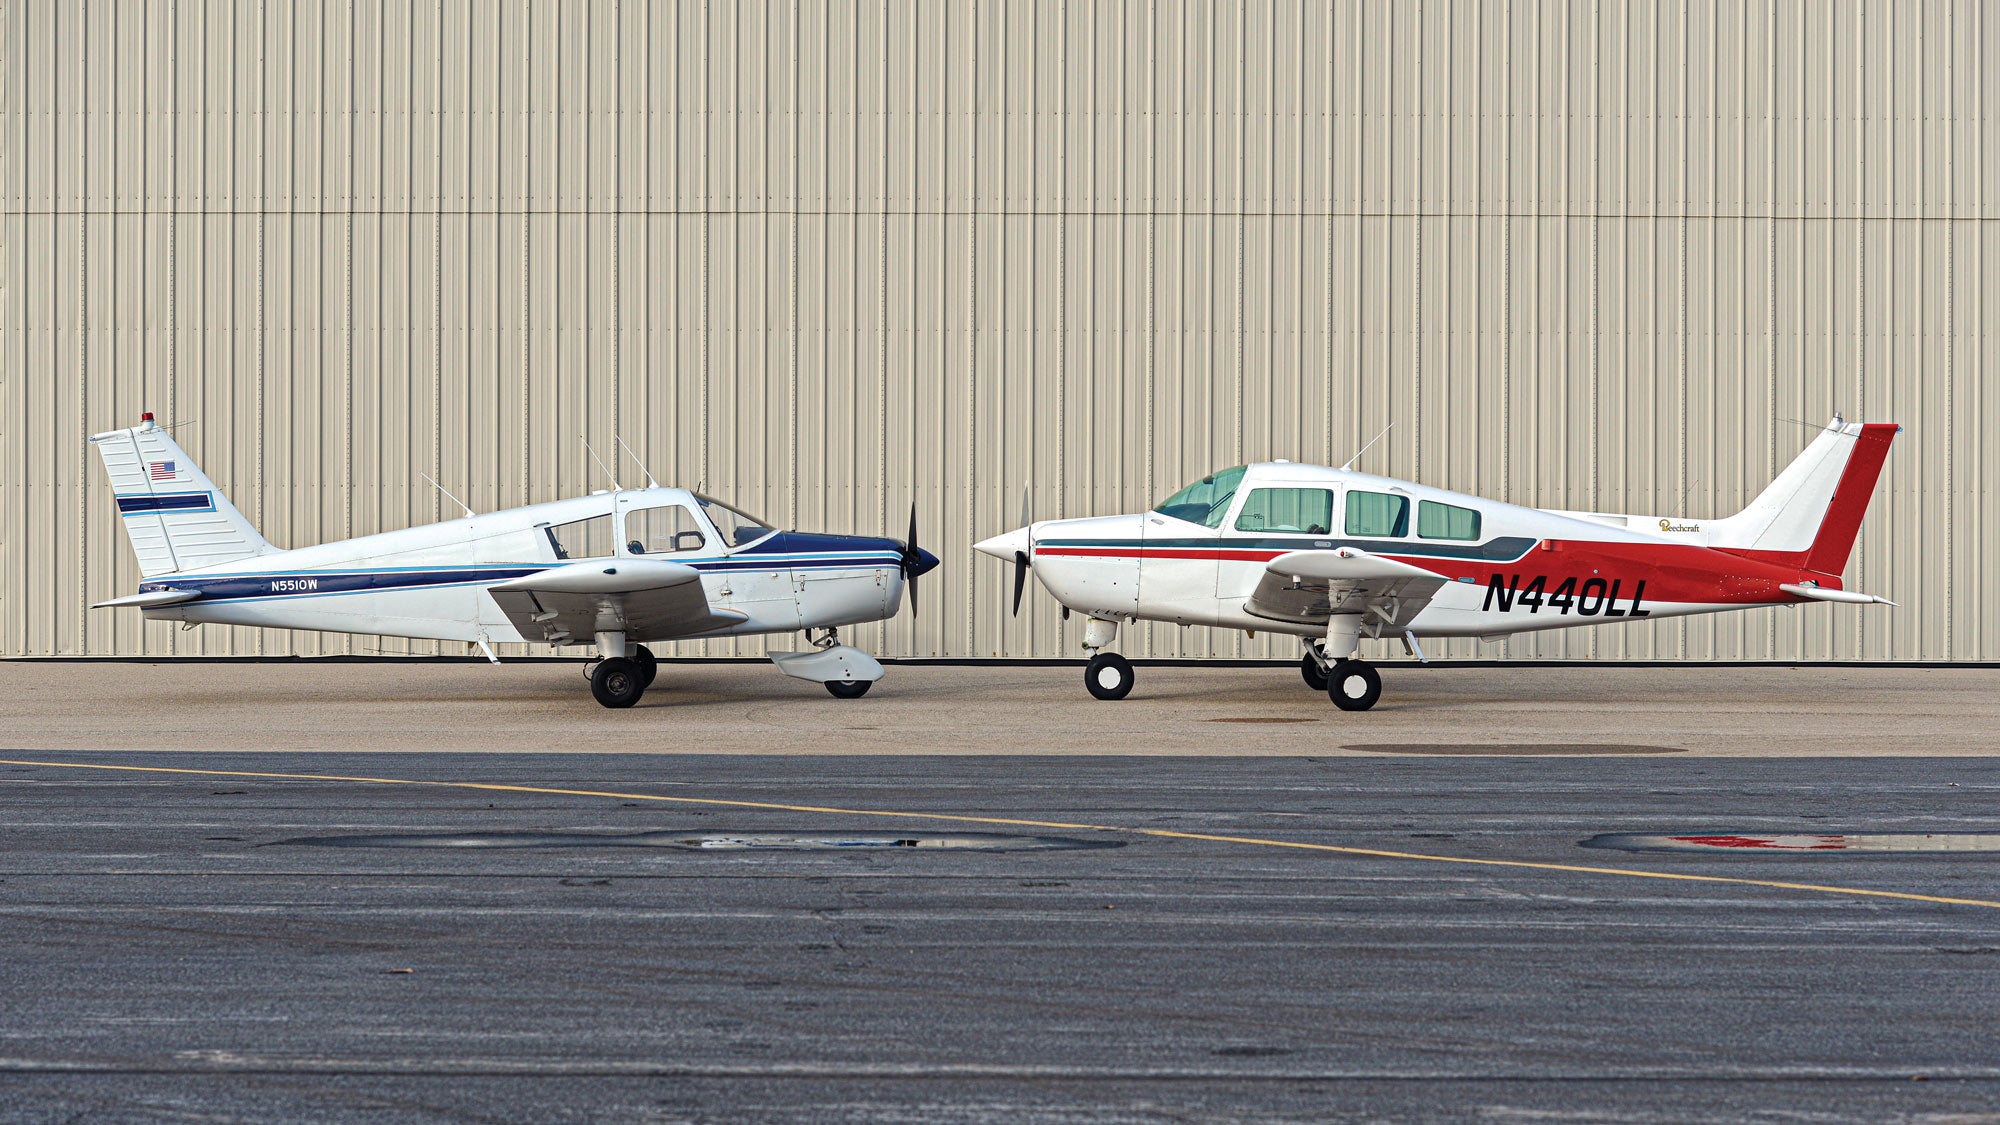 Single engine prop aircraft facing each other.